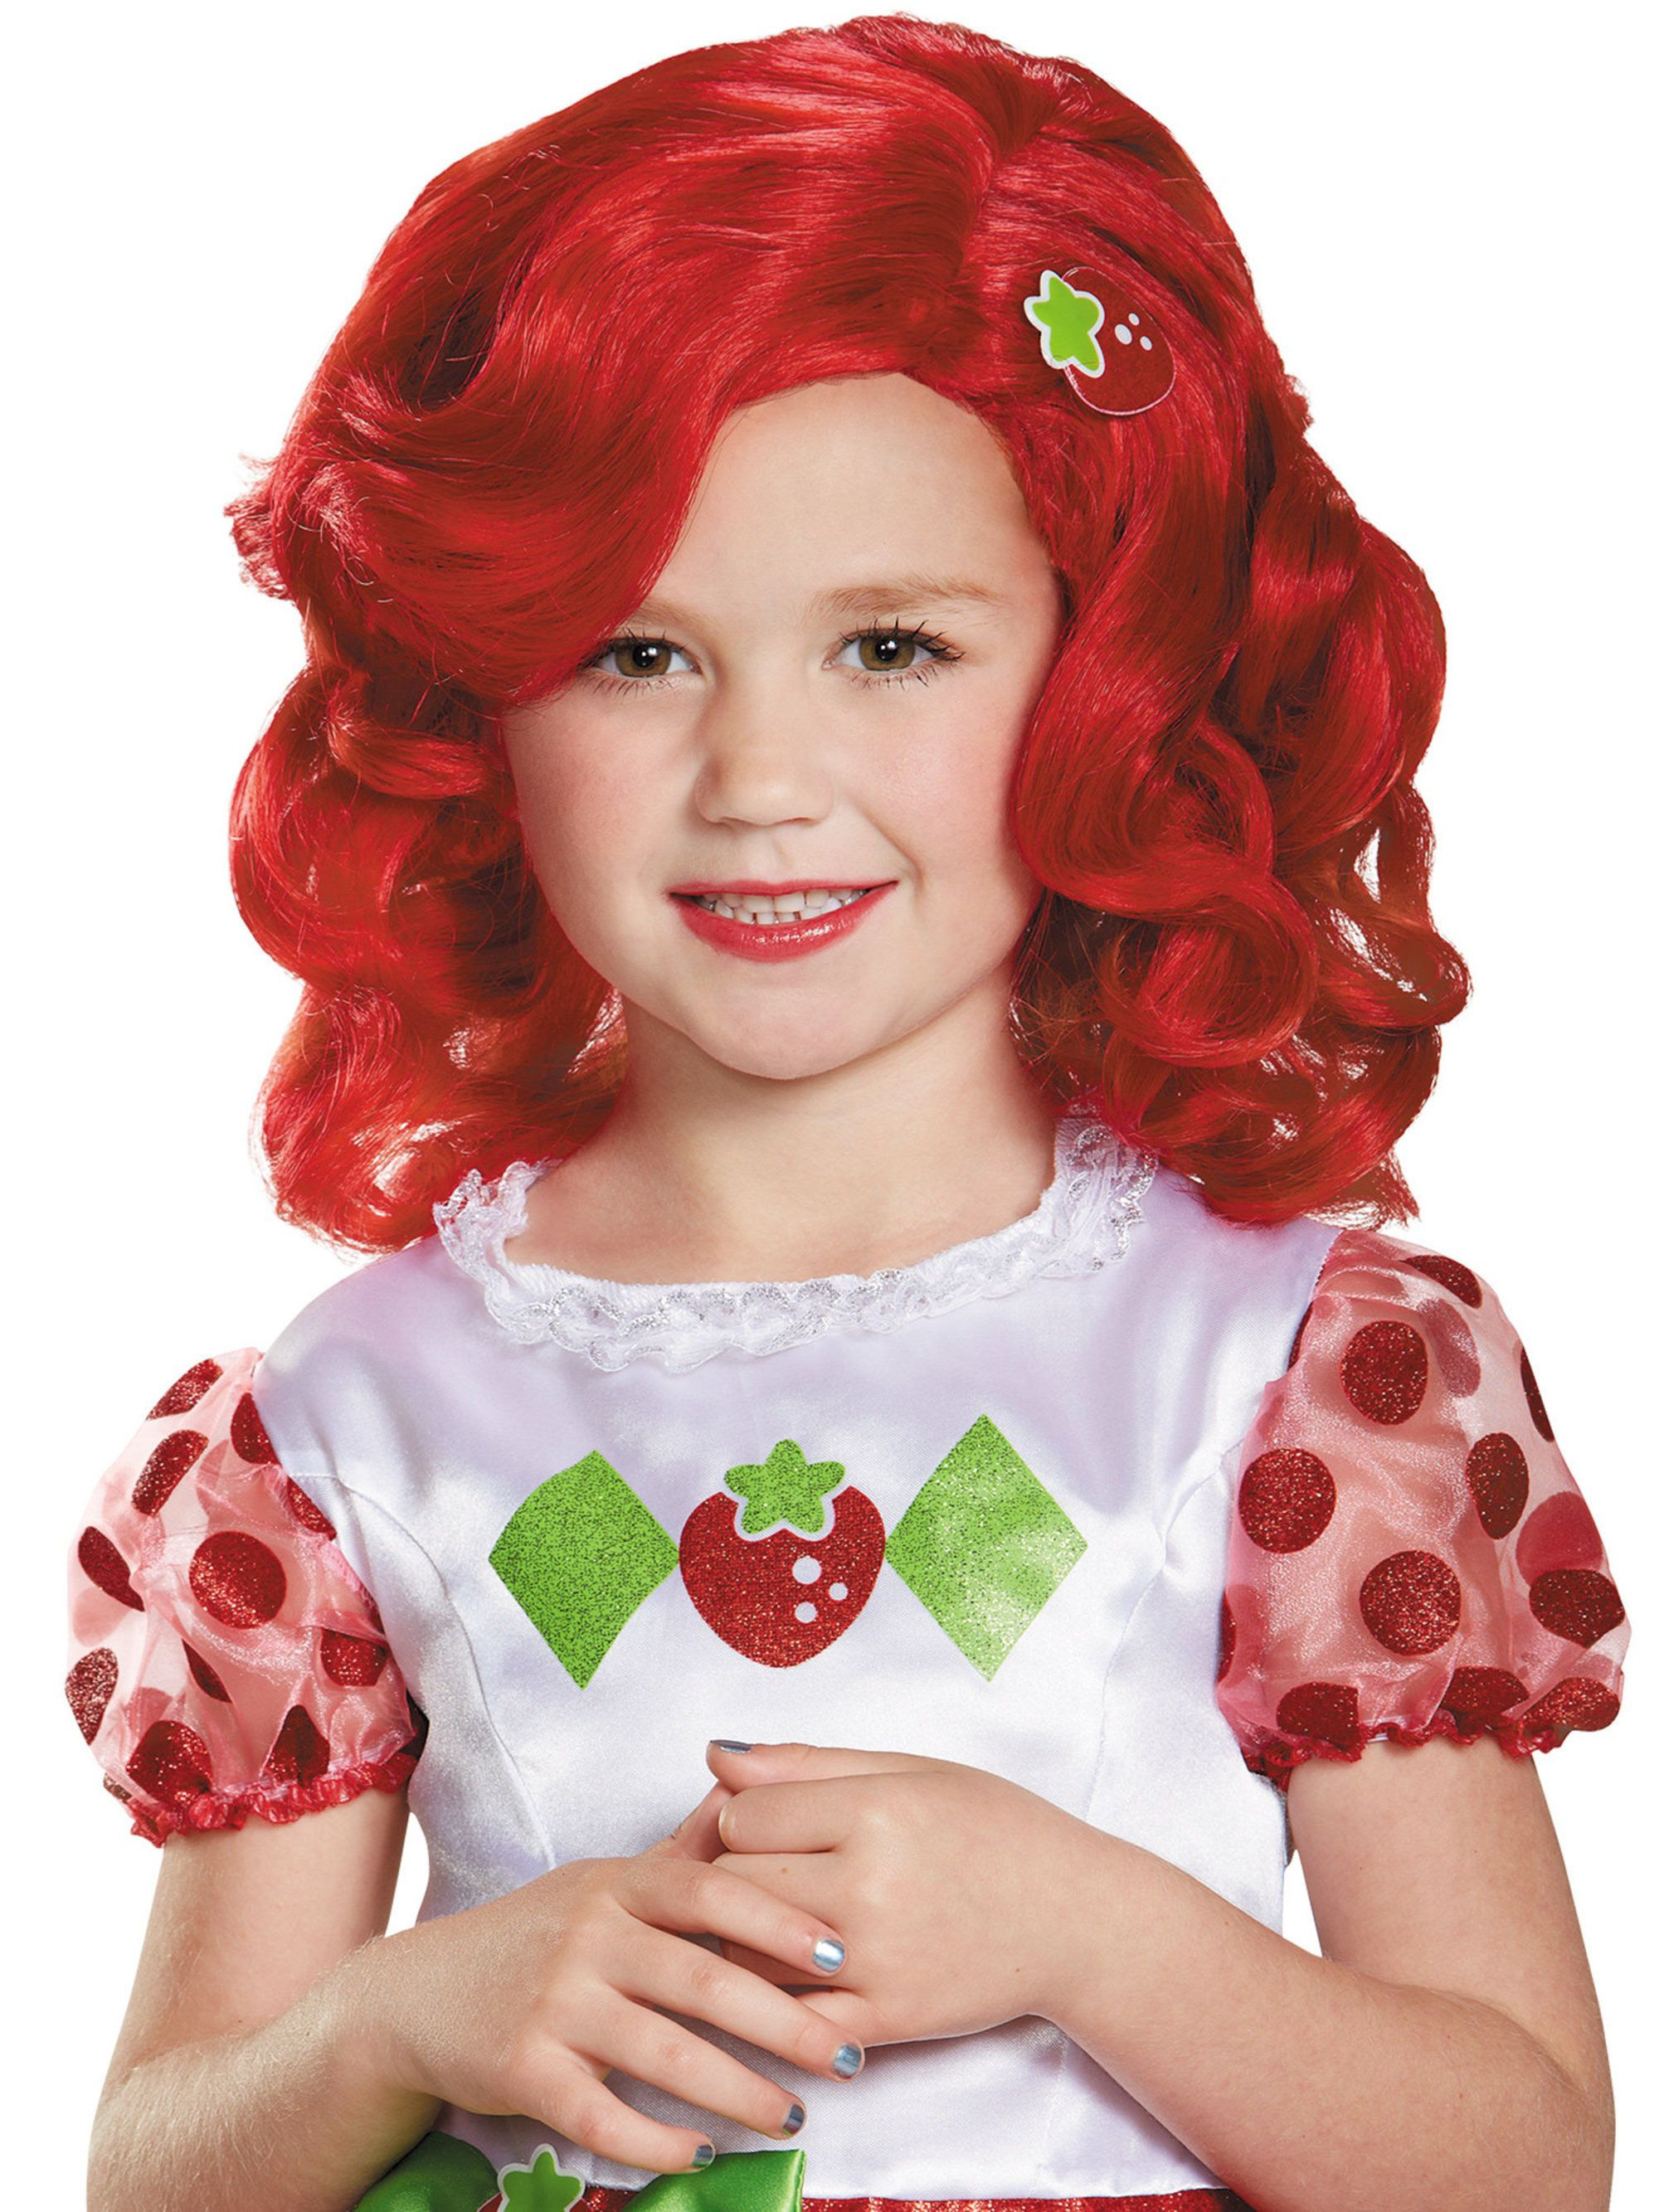 Strawberry Shortcake Girl
 Strawberry Shortcake Girls Wig Wigs for Kids & Adults